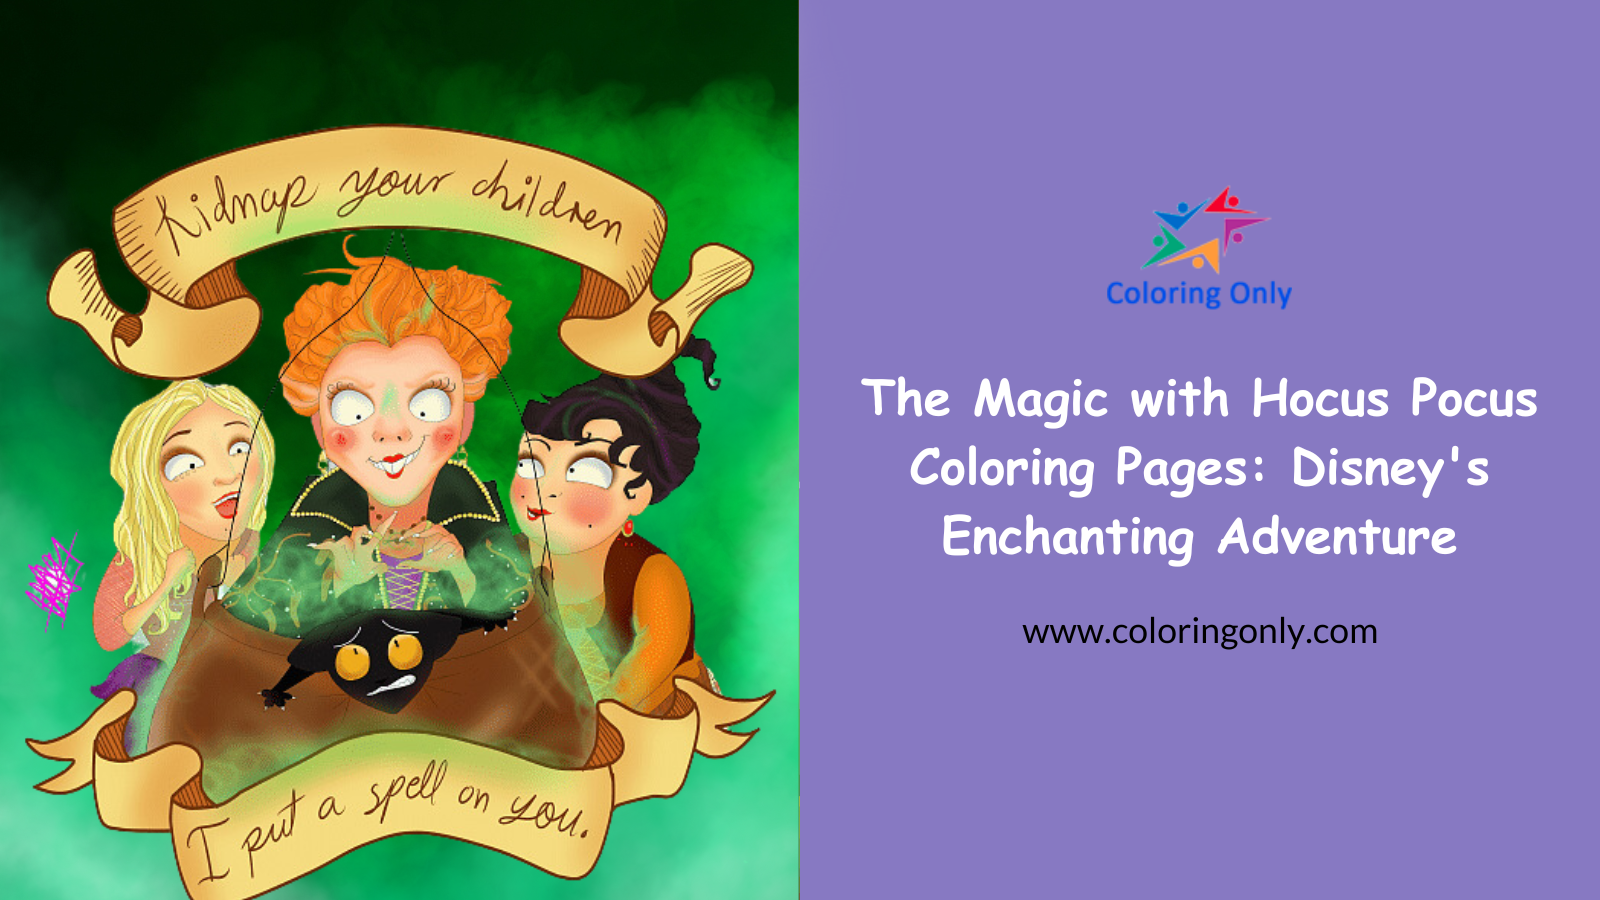 The Magic with Hocus Pocus Coloring Pages: Disney’s Enchanting Adventure